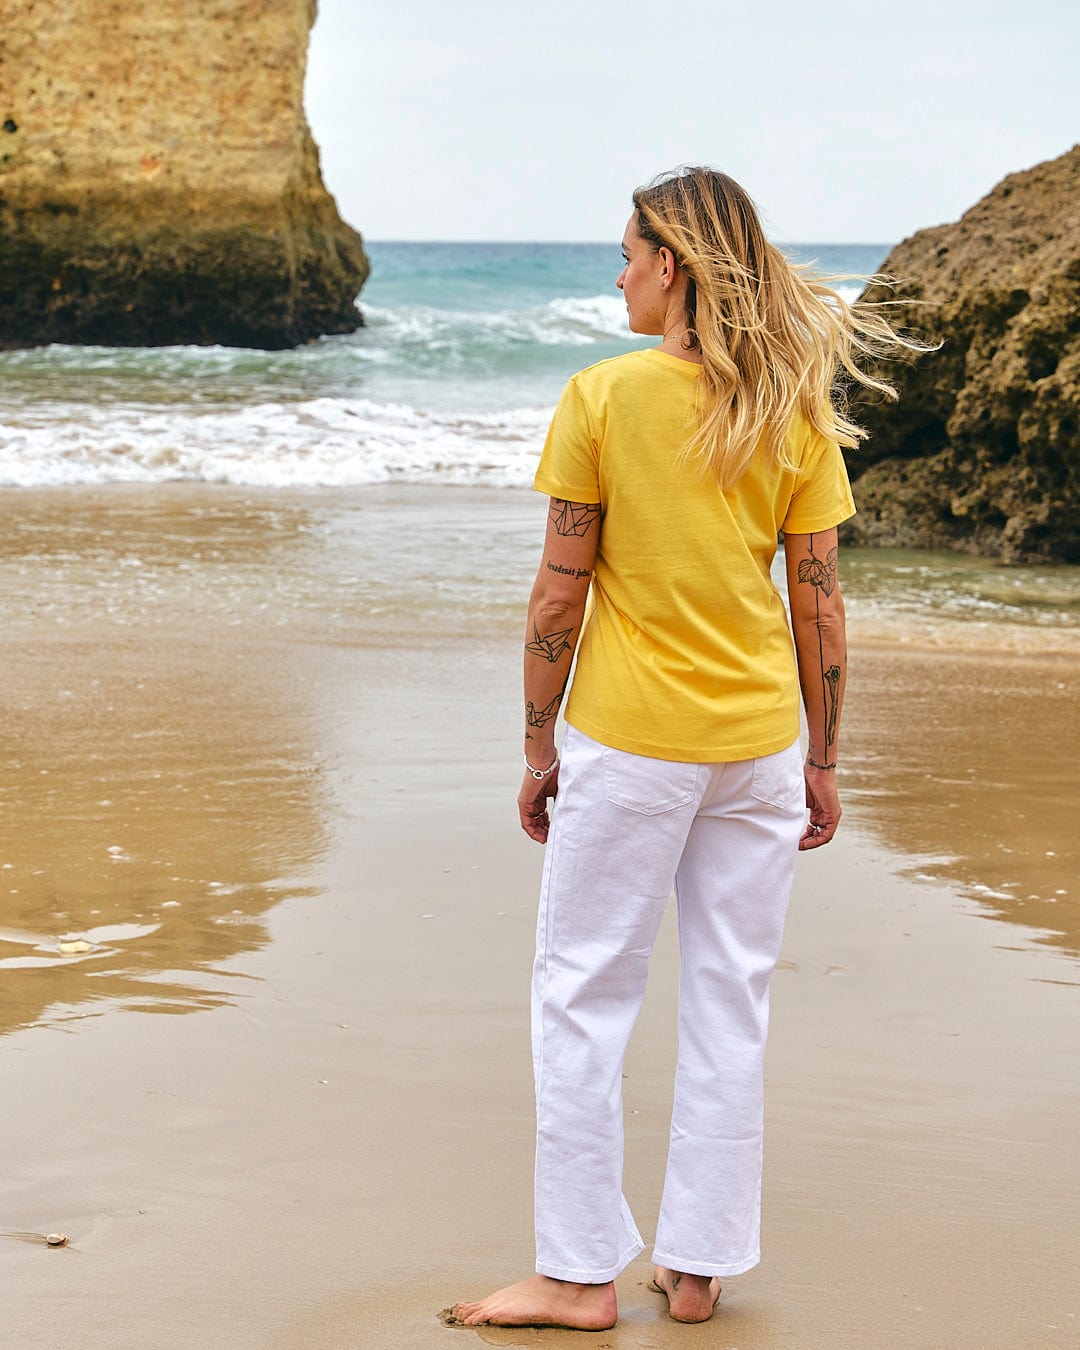 A woman wearing the Saltrock On The Road - Womens Short Sleeve T-Shirt - Yellow standing on a beach.